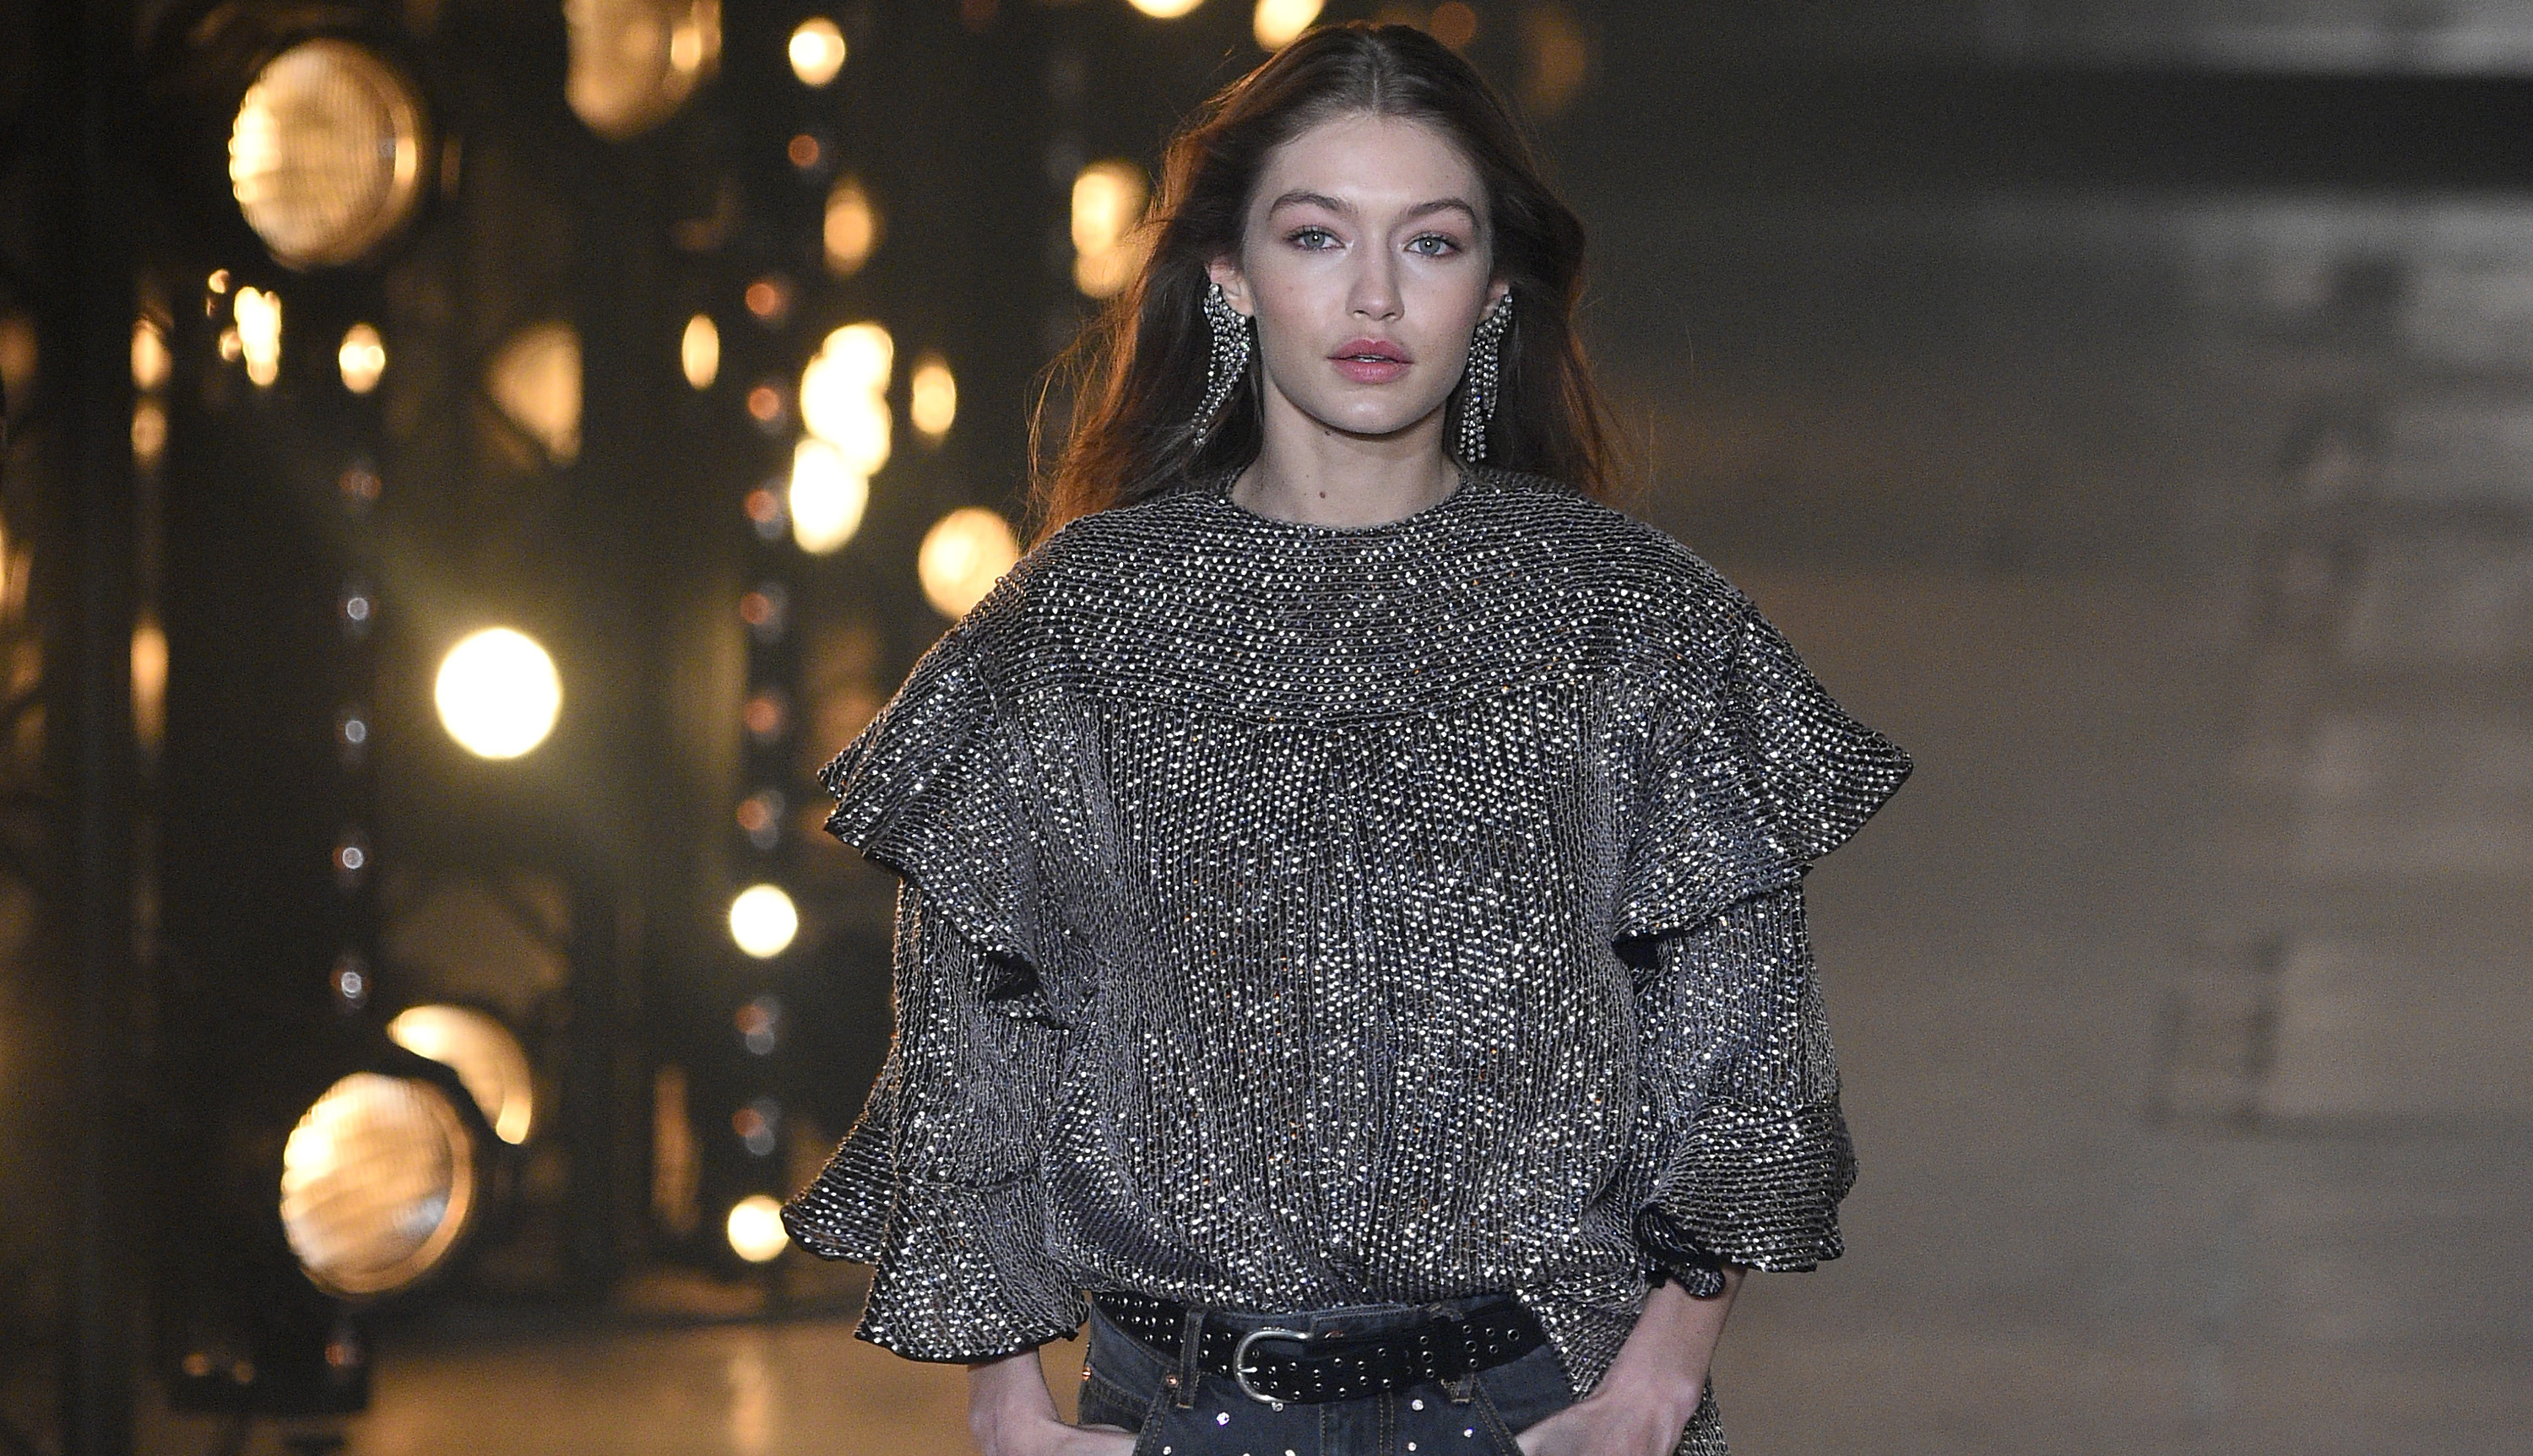 Gigi Hadid's Latest Catwalk For Versace Is Her Dullest Walk To Date,  Netizens React, 'Terrible Walk